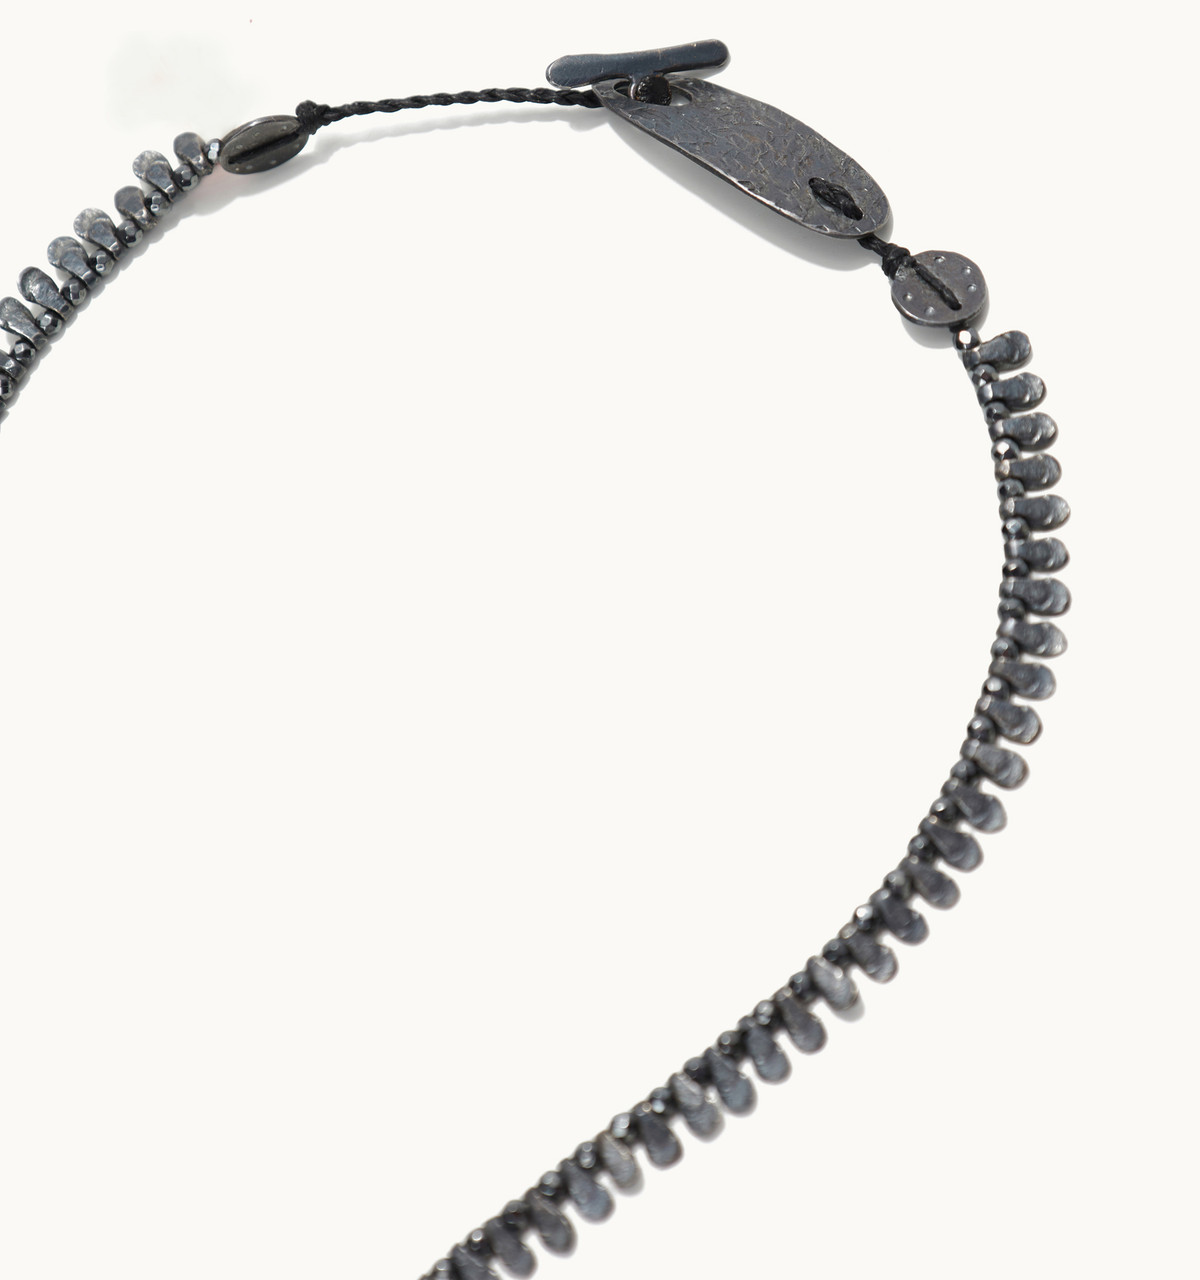 Girasole Black Plated Silver Necklace, Mary Gaitani, tomfoolery